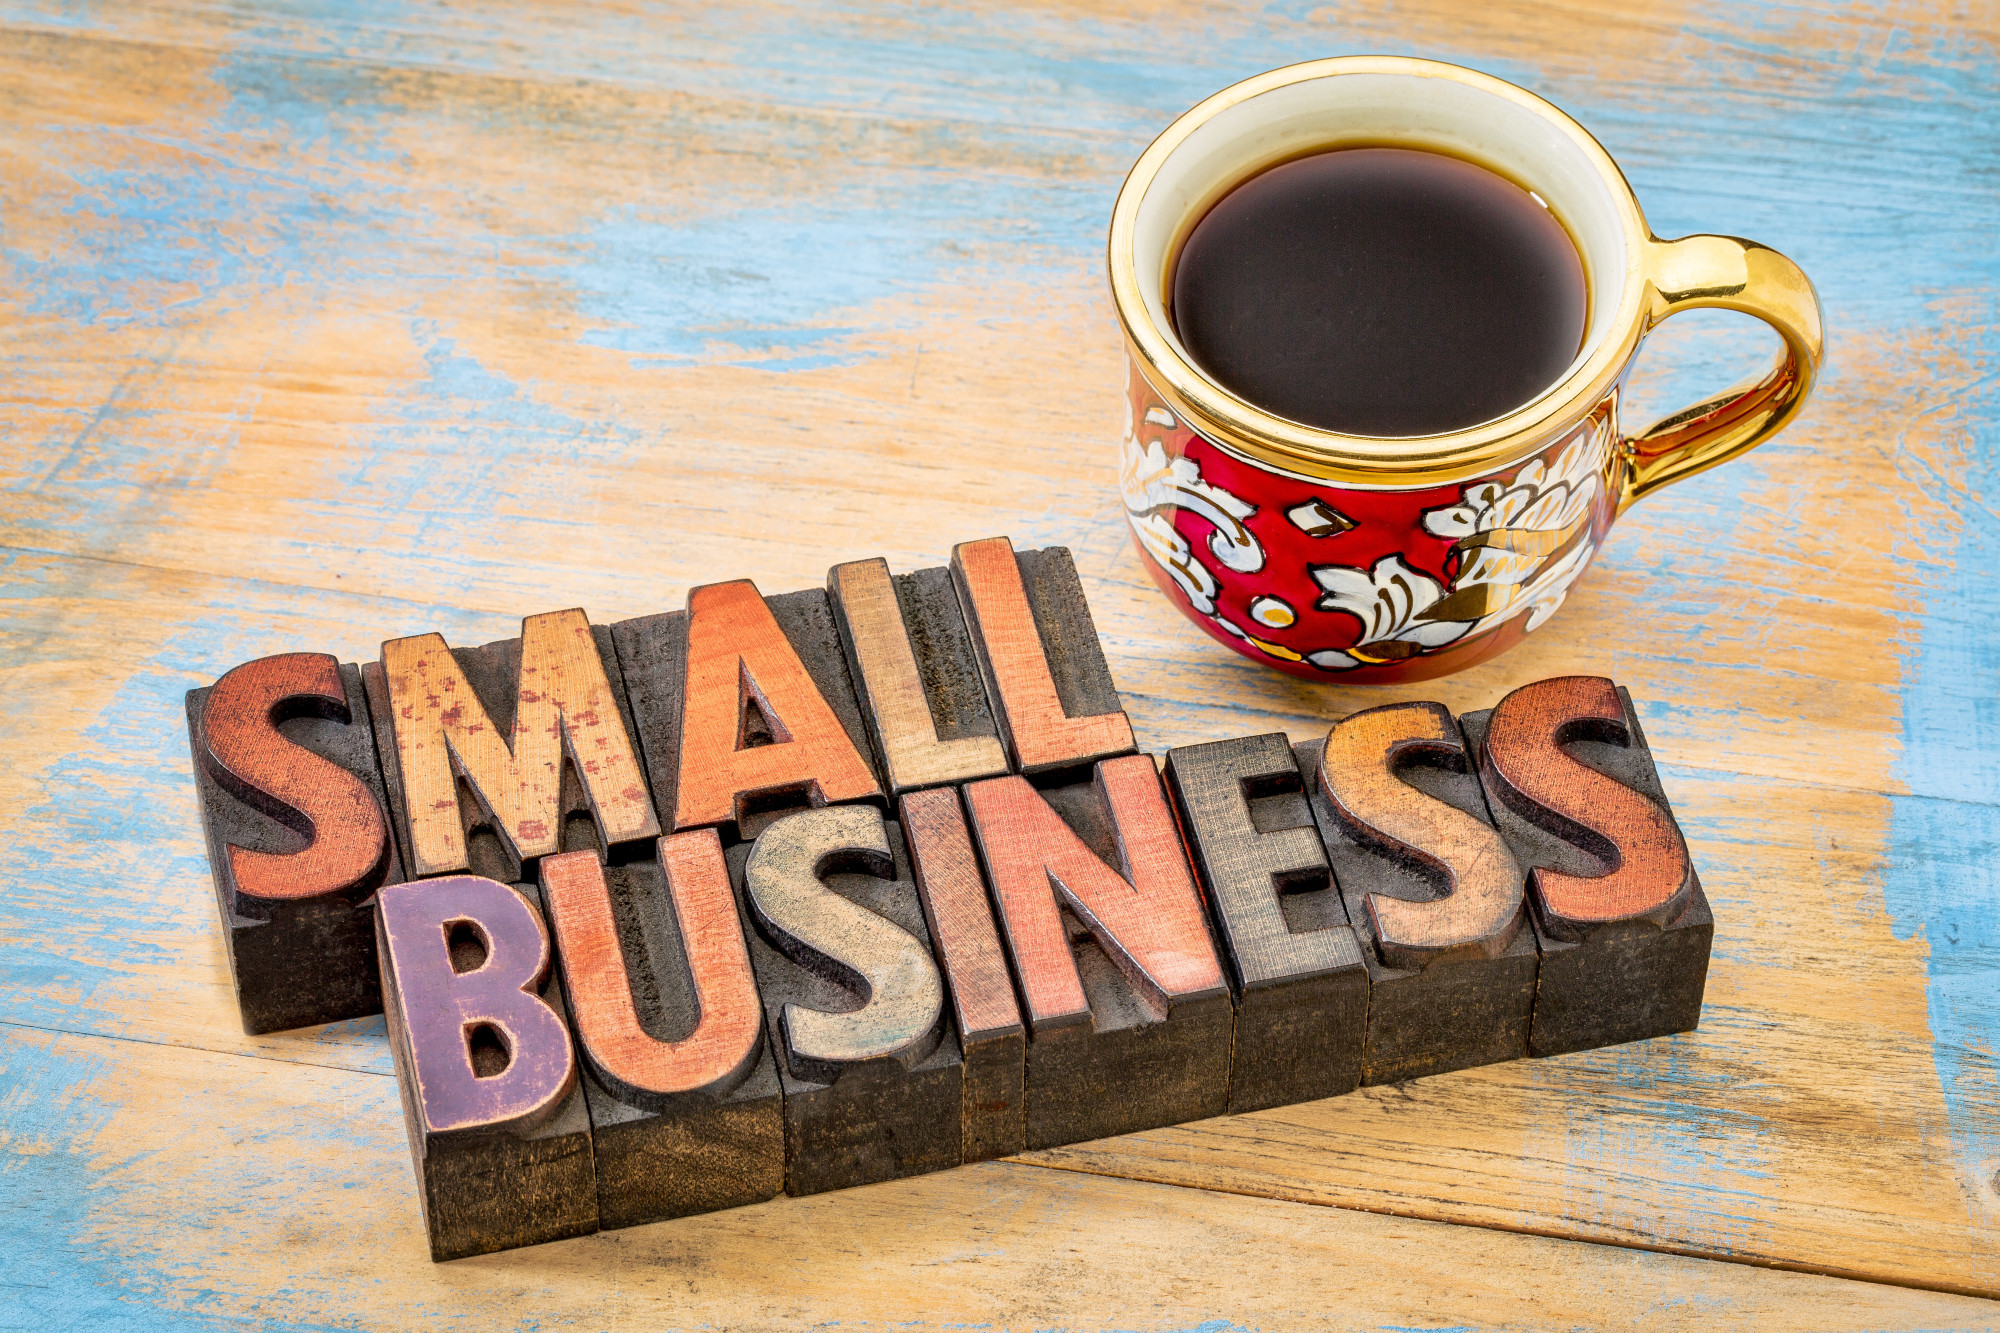 successful small businesses